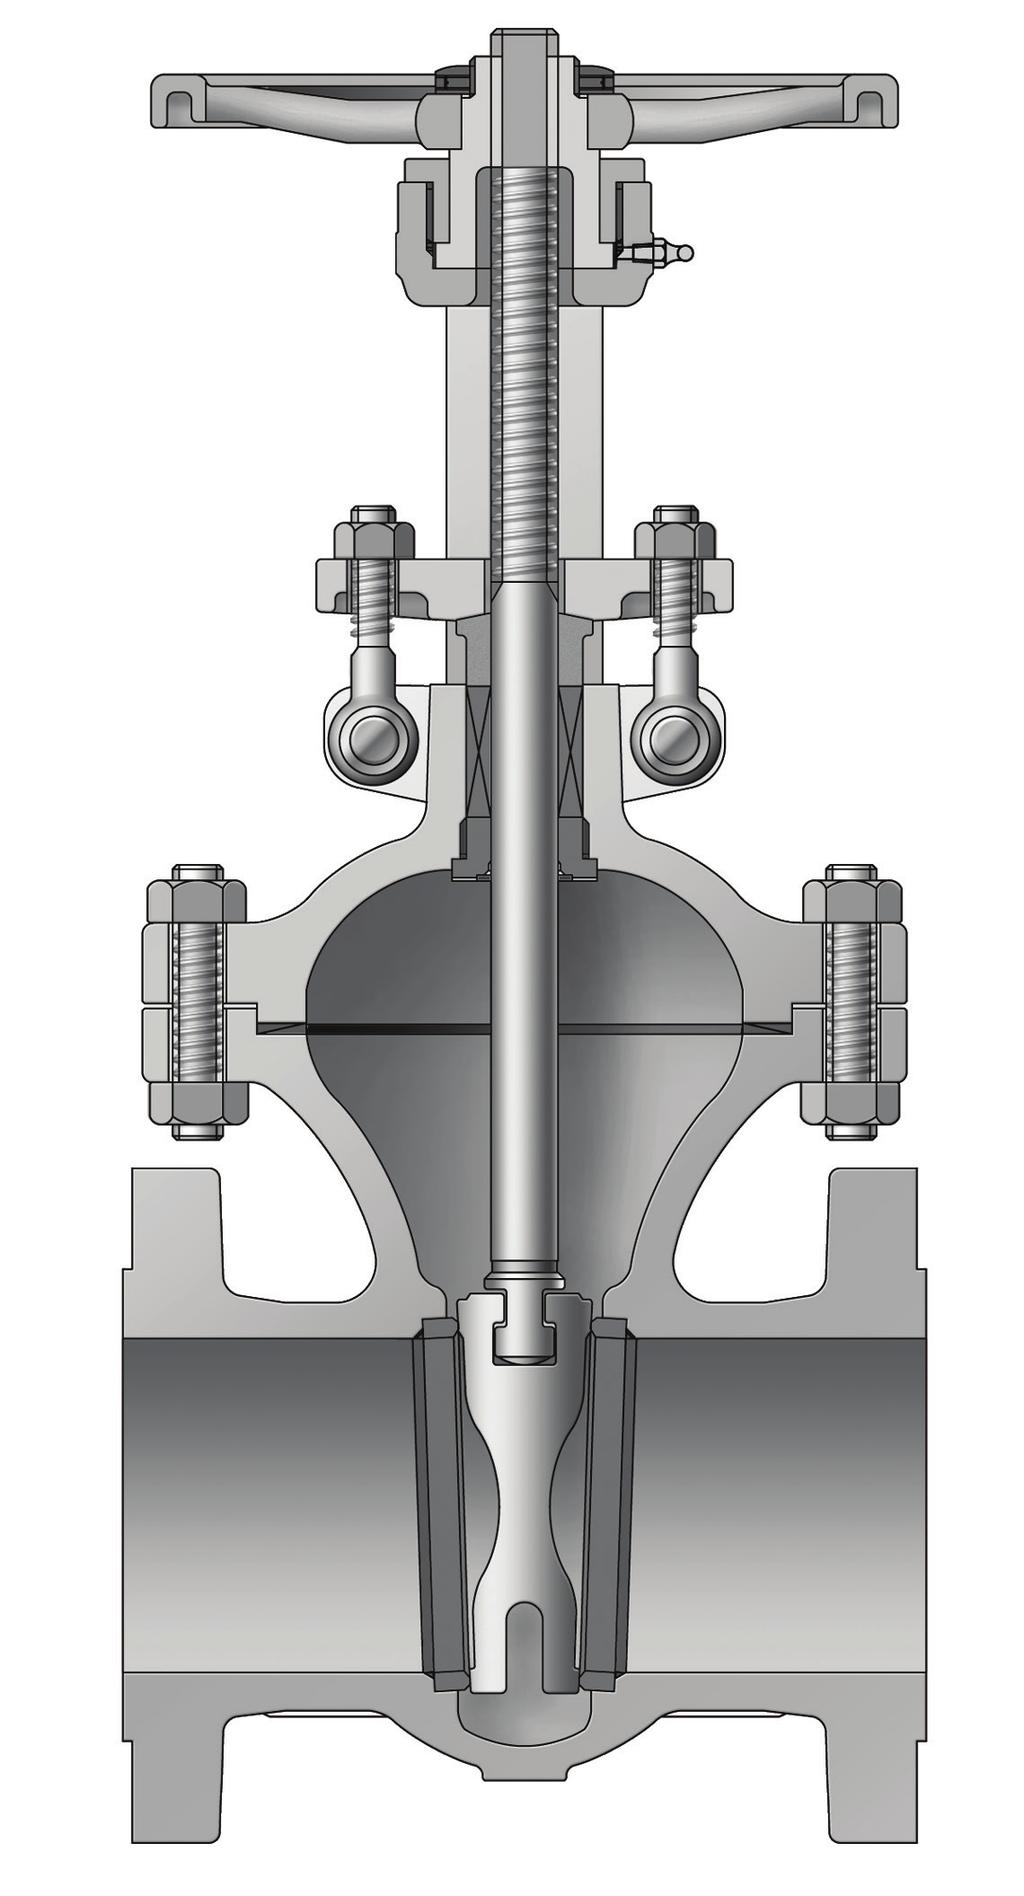 GATE VAVE FUNCTION Gate valve is characterized by a sliding wedge which is moved by actuator perpendicular to the flow direction. There are a variety of valve sizes and types.